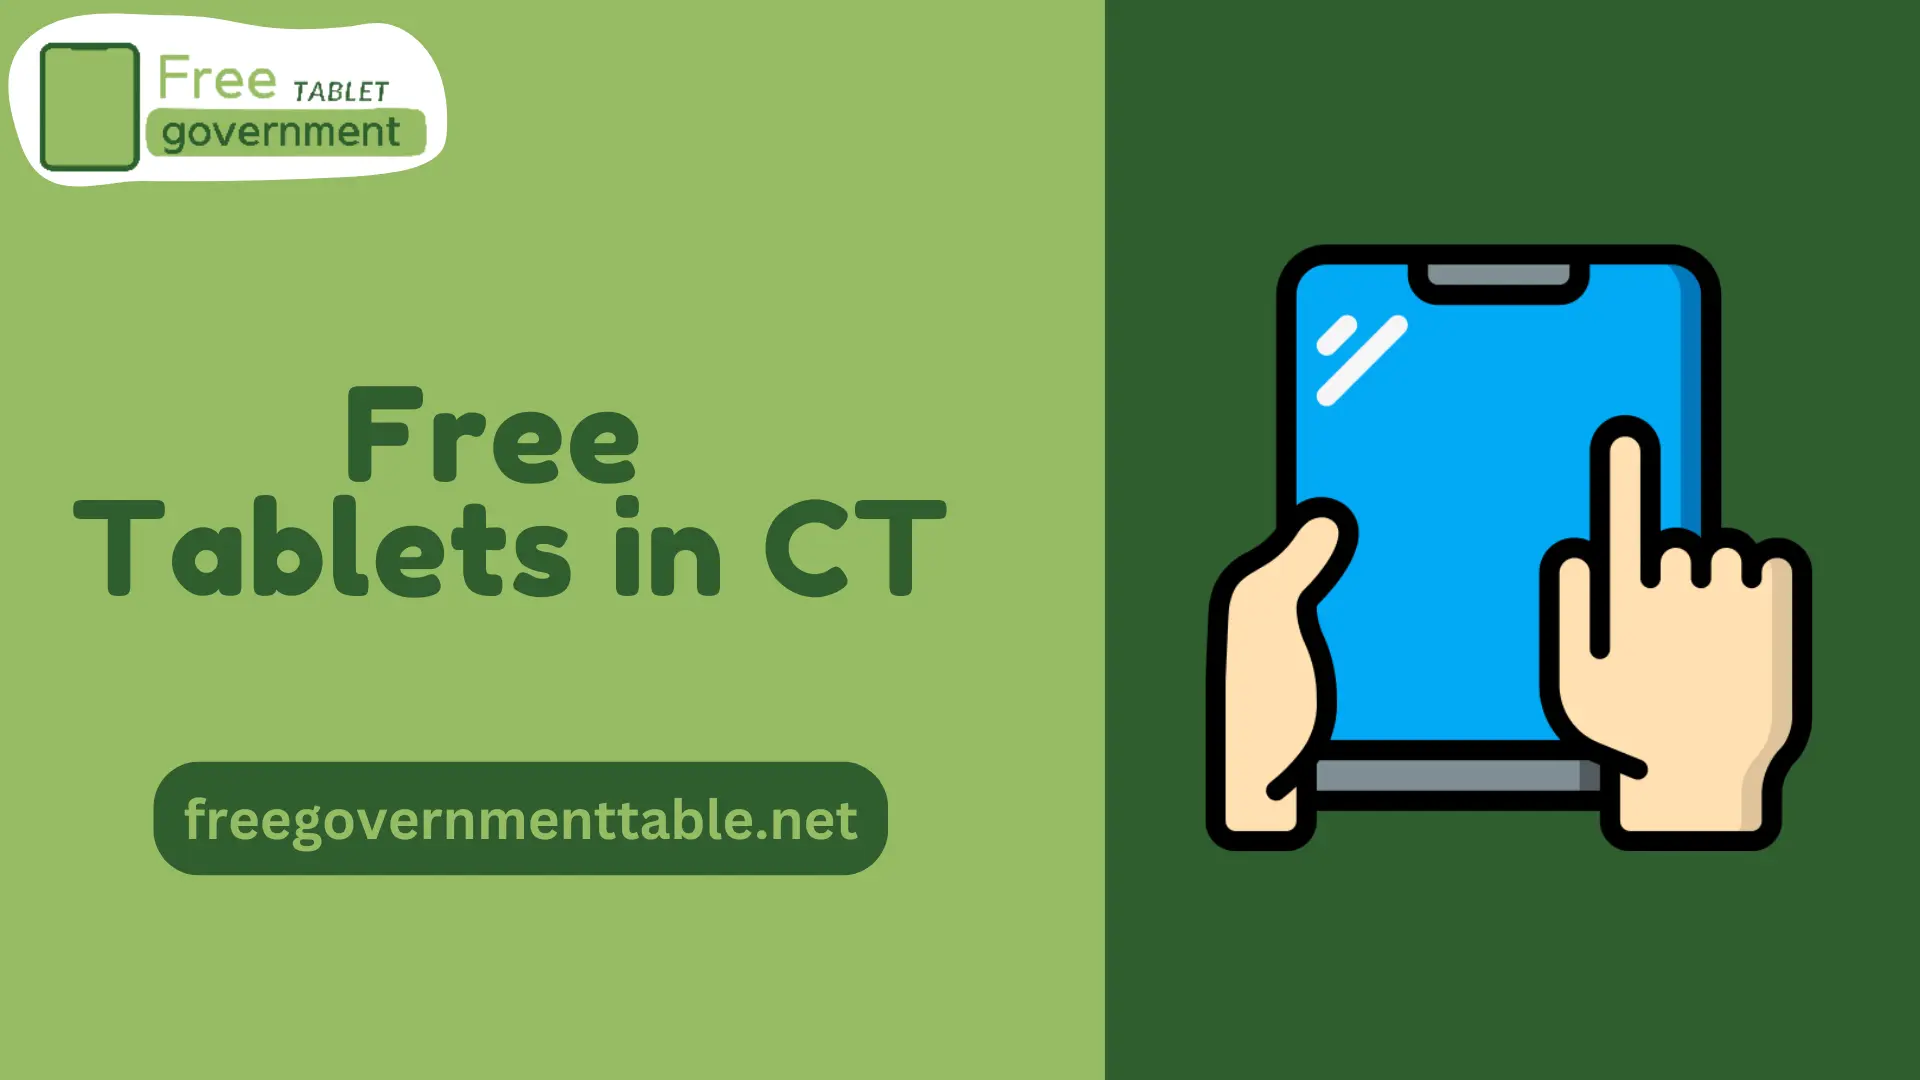 Free Tablets in CT